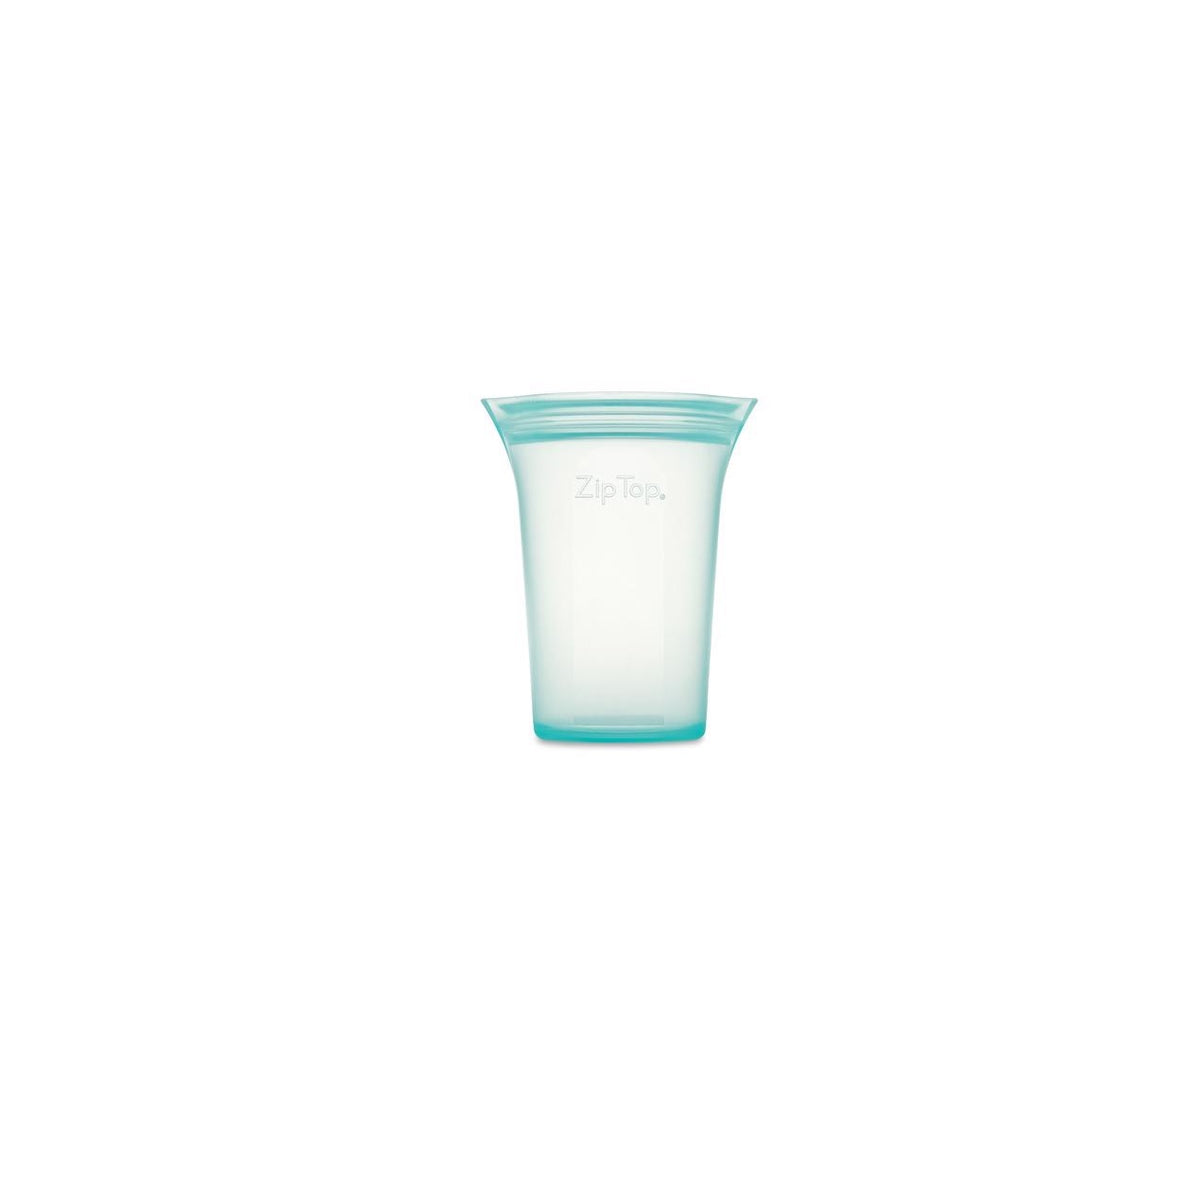 Zip Top Z-CUPS-03 Small Storage Cup, Teal, 8 oz